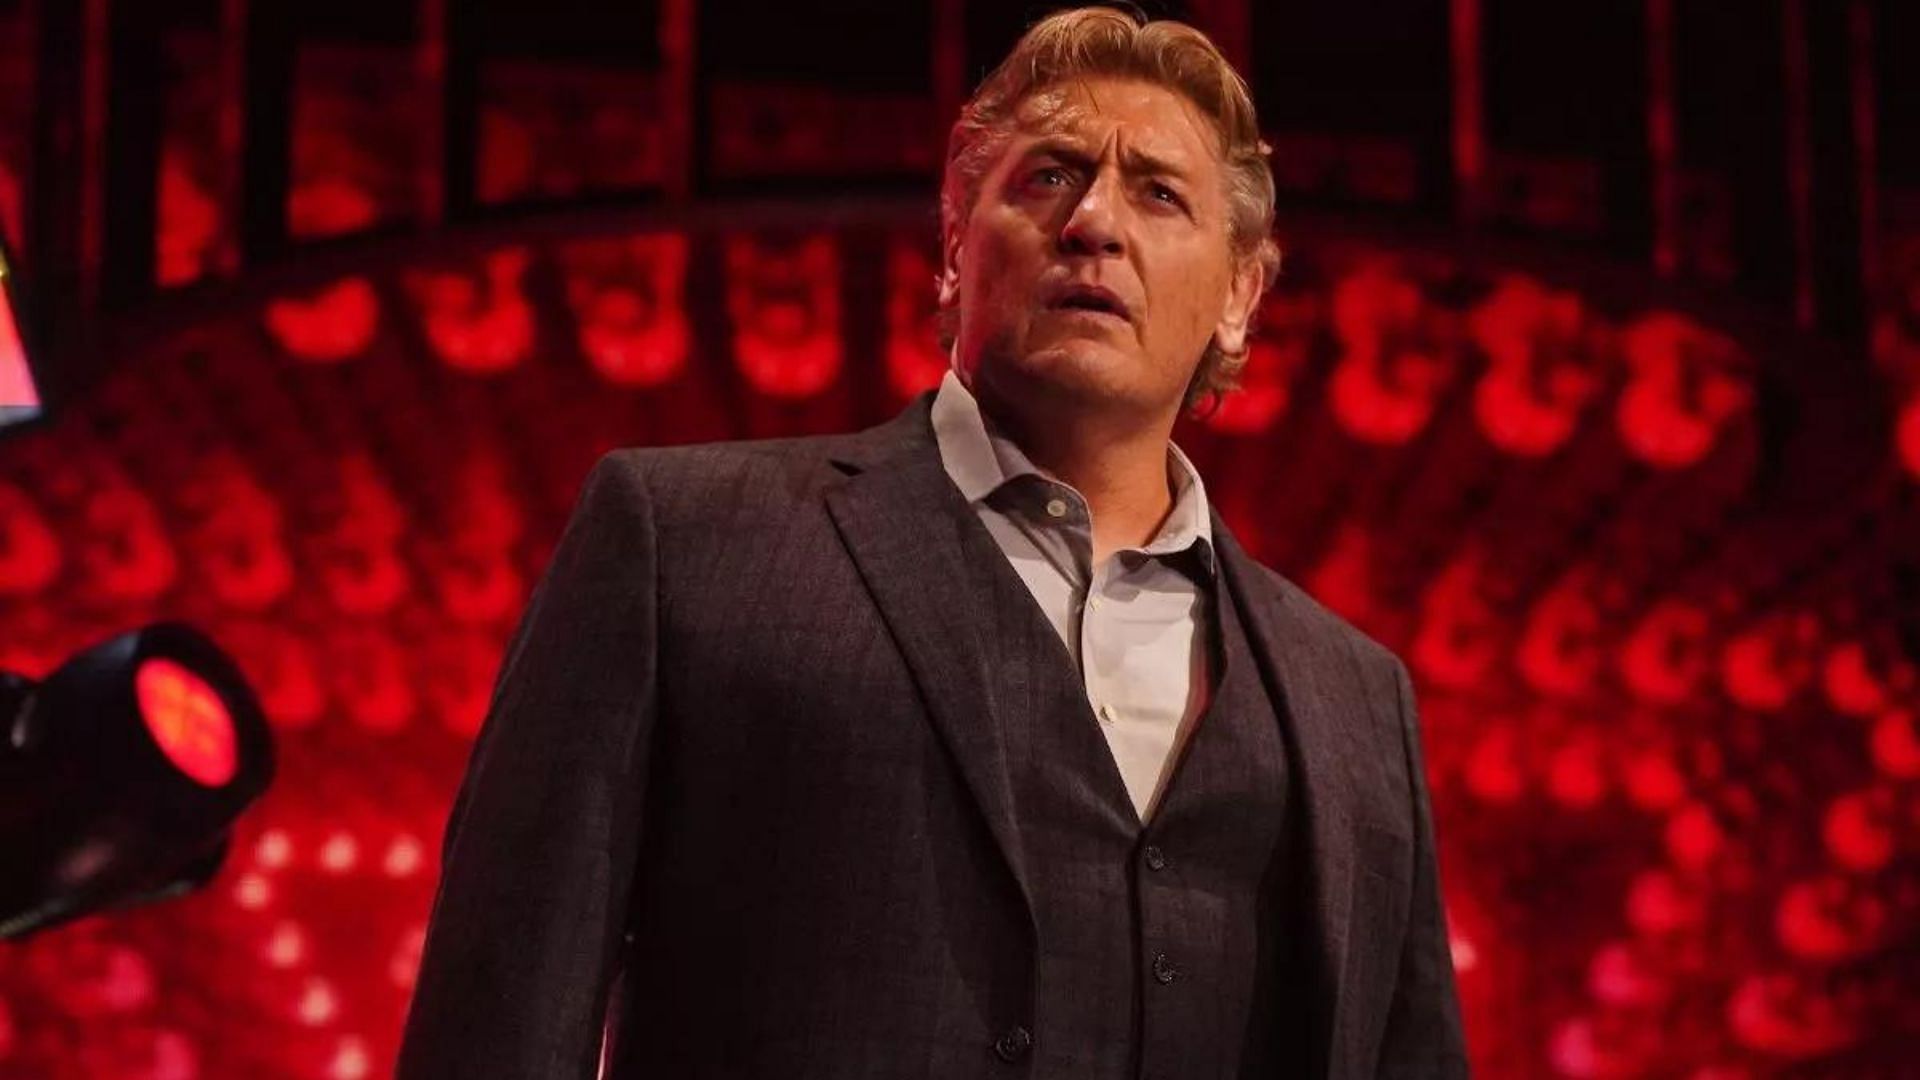 William Regal had worked in AEW before returning to WWE